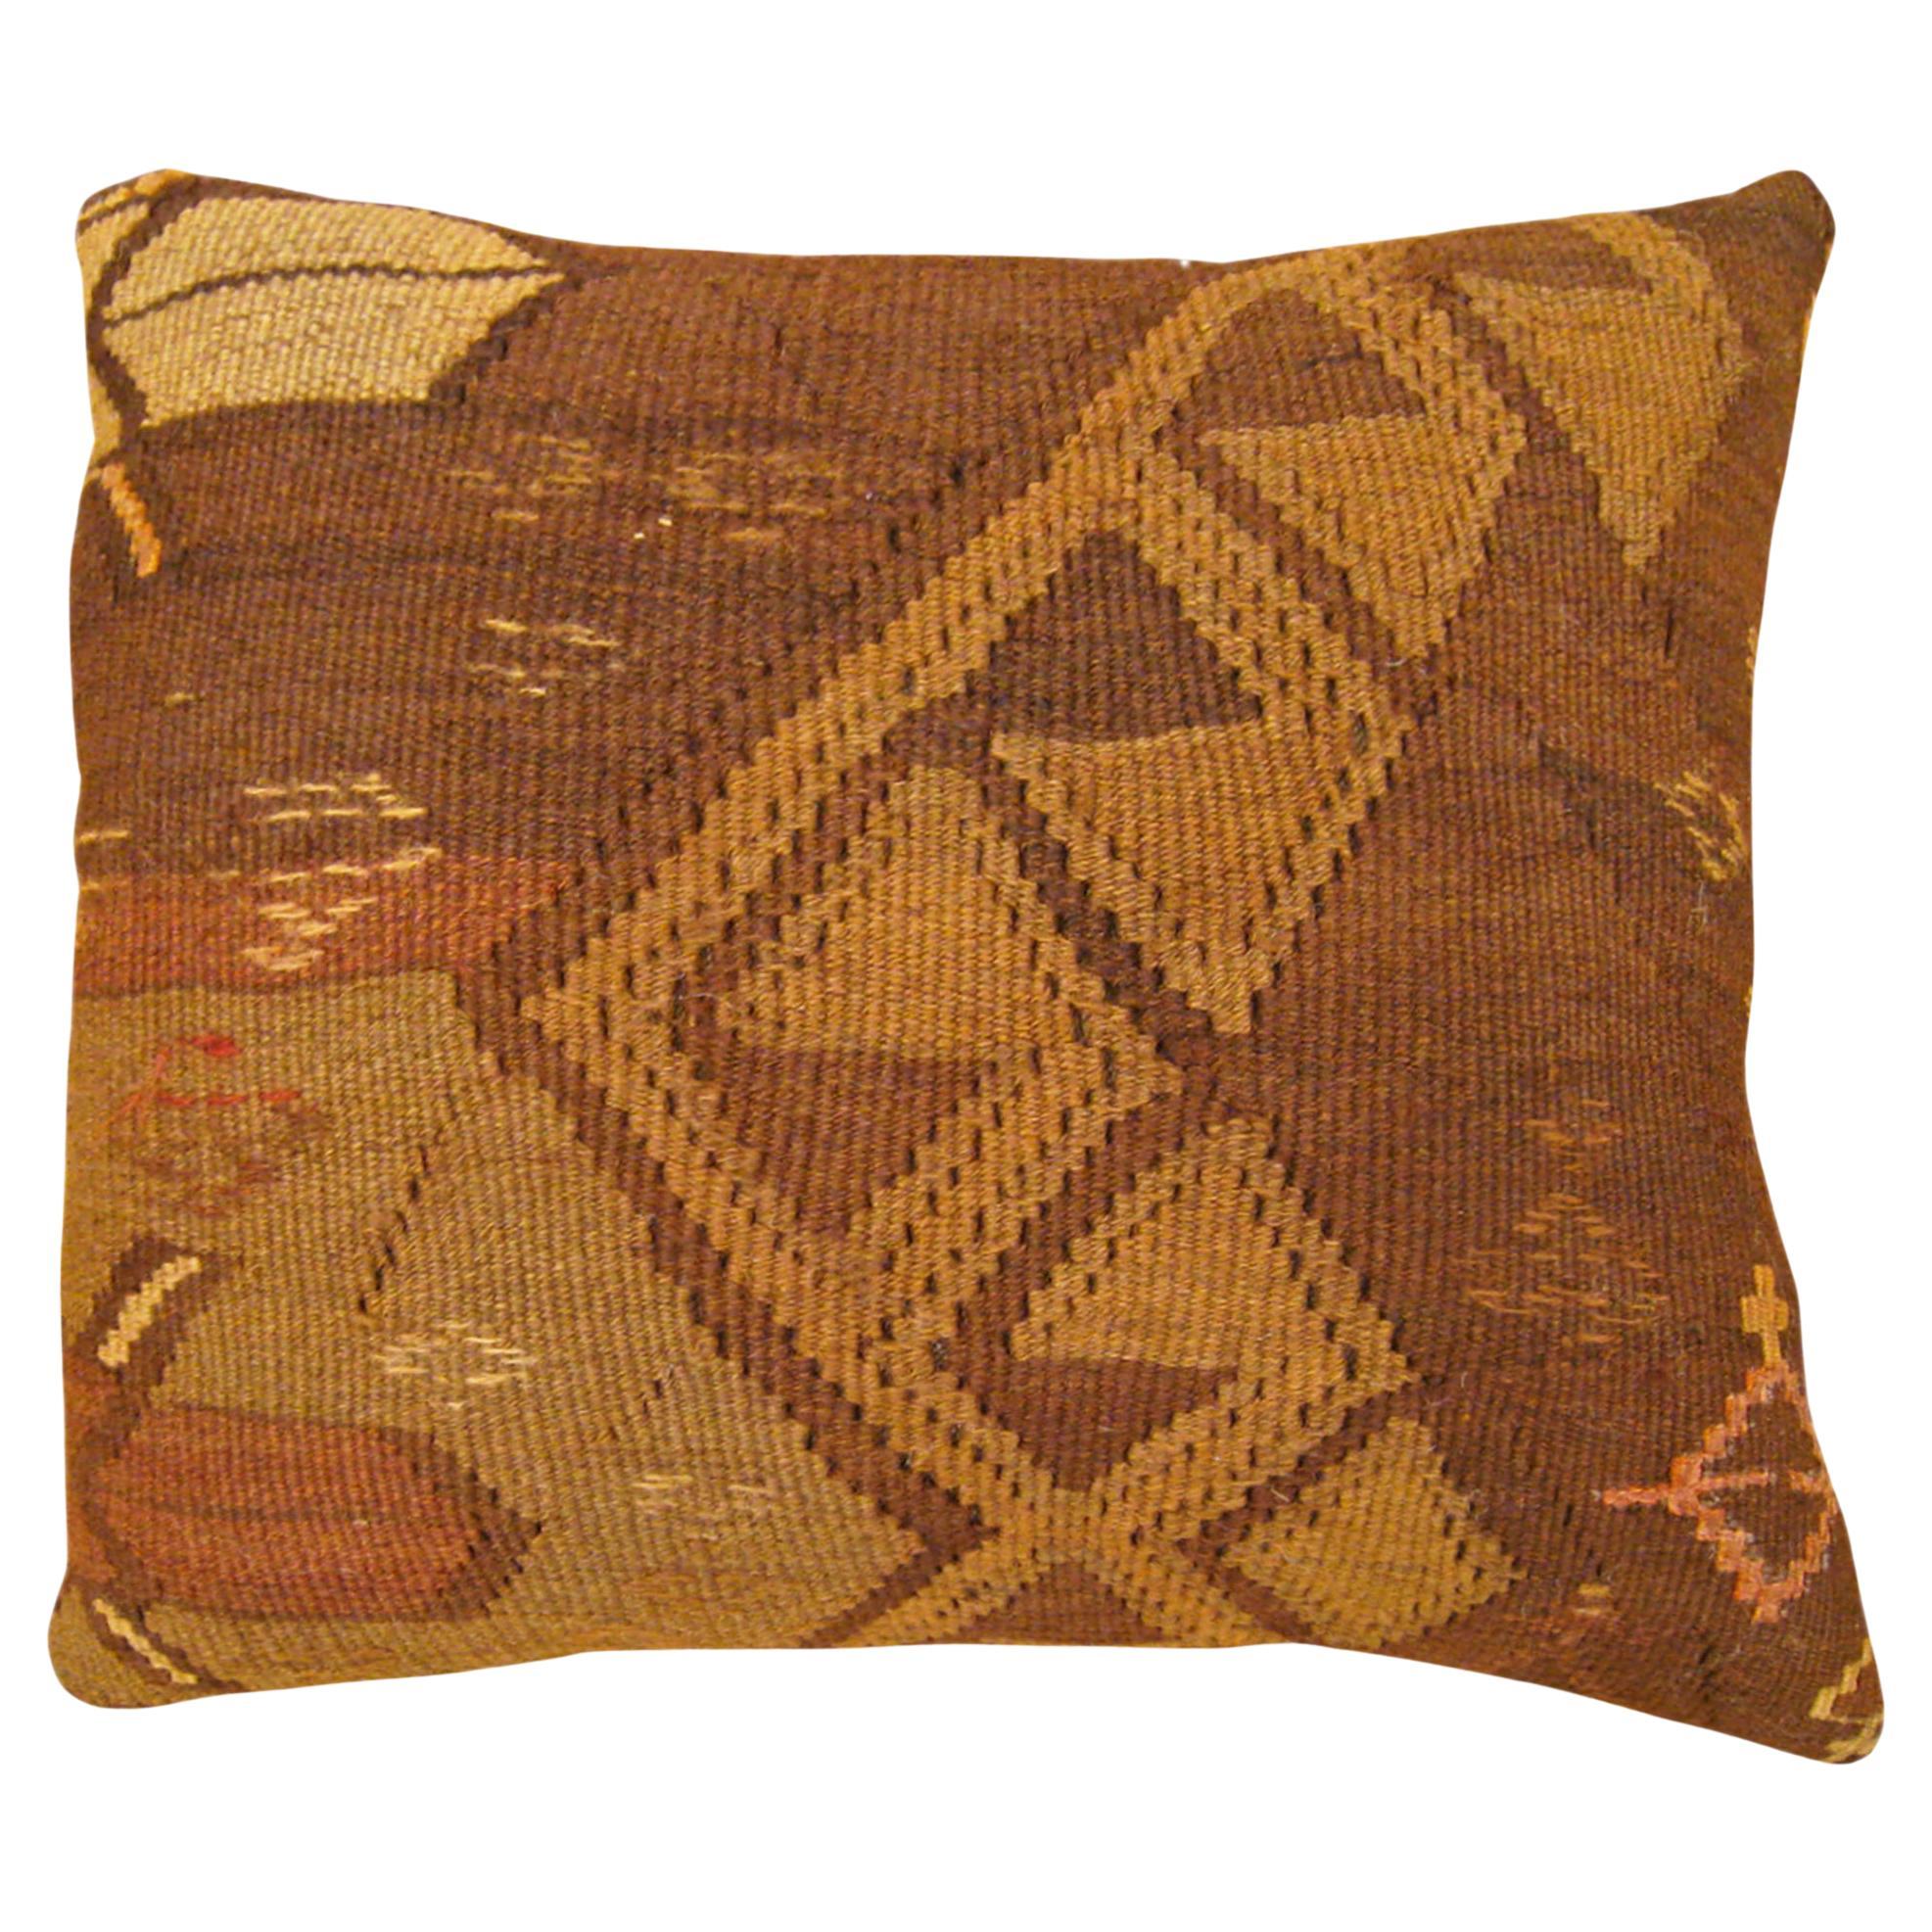 Decorative Vintage Turkish Kilim Pillow with Geometric Abstracts For Sale